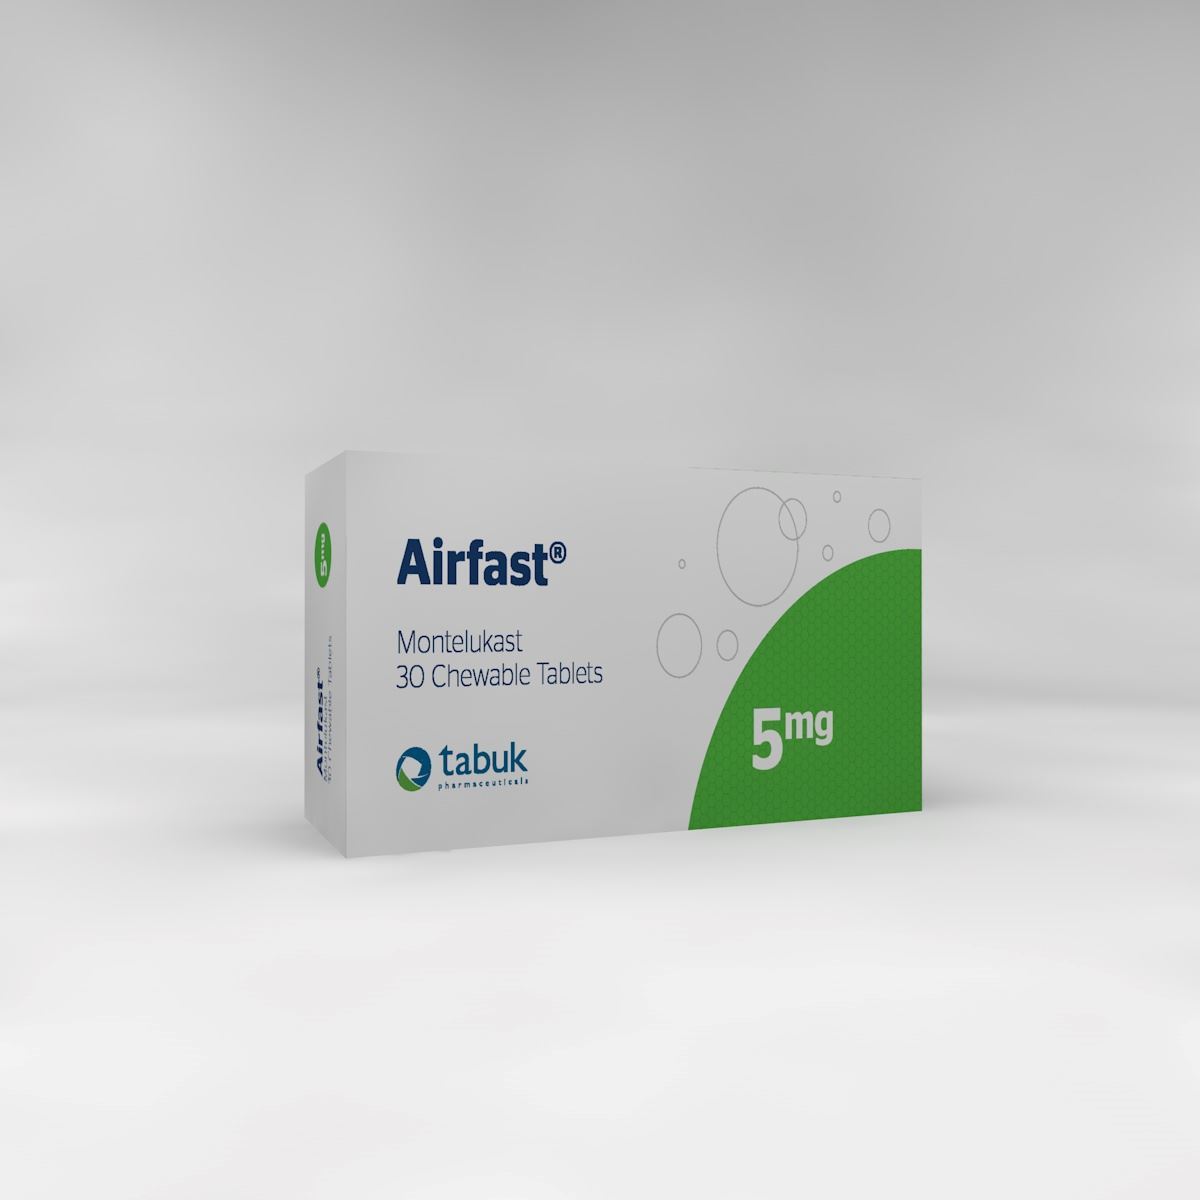 AIRFAST 5 MG 30 CHEWABLE TABLETS